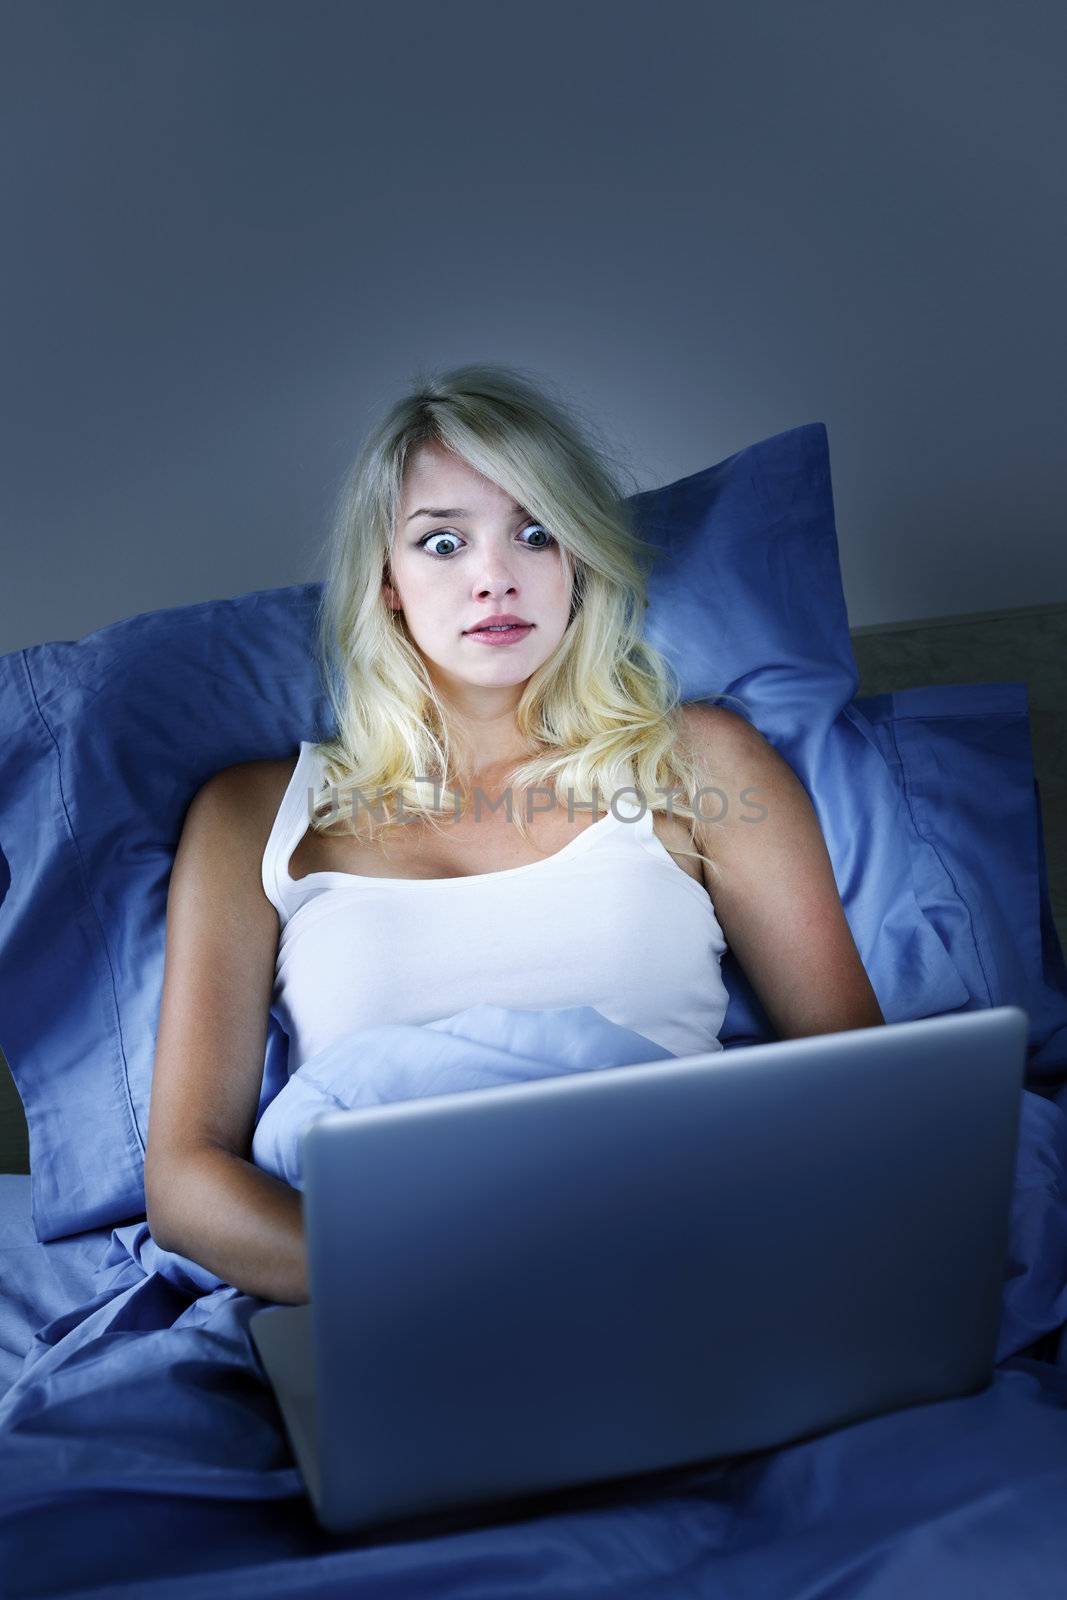 Scared woman using laptop computer in bed at night with wide eyes